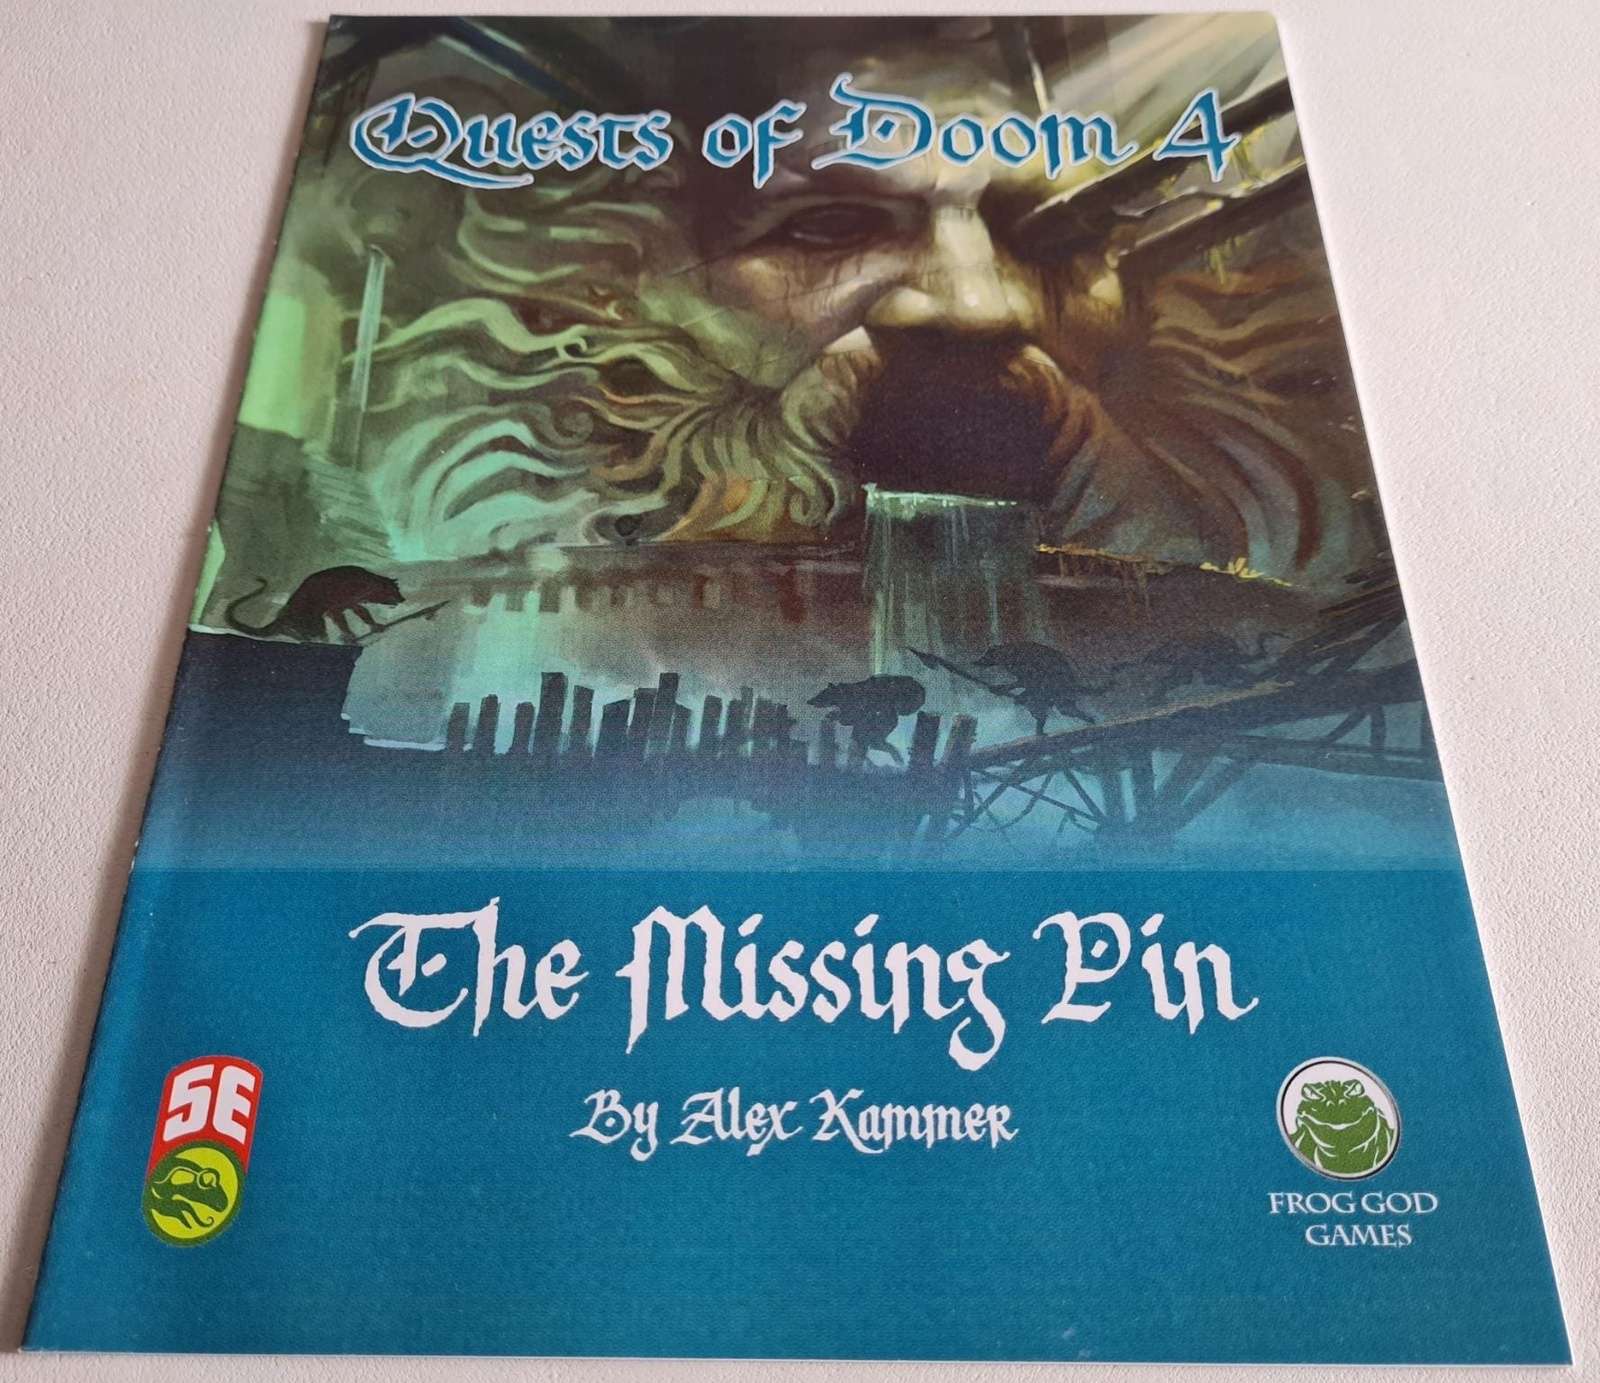 Quests of Doom 4: The Missing Pin - Dungeons and Dragons 5th Edition (5e) Default Title